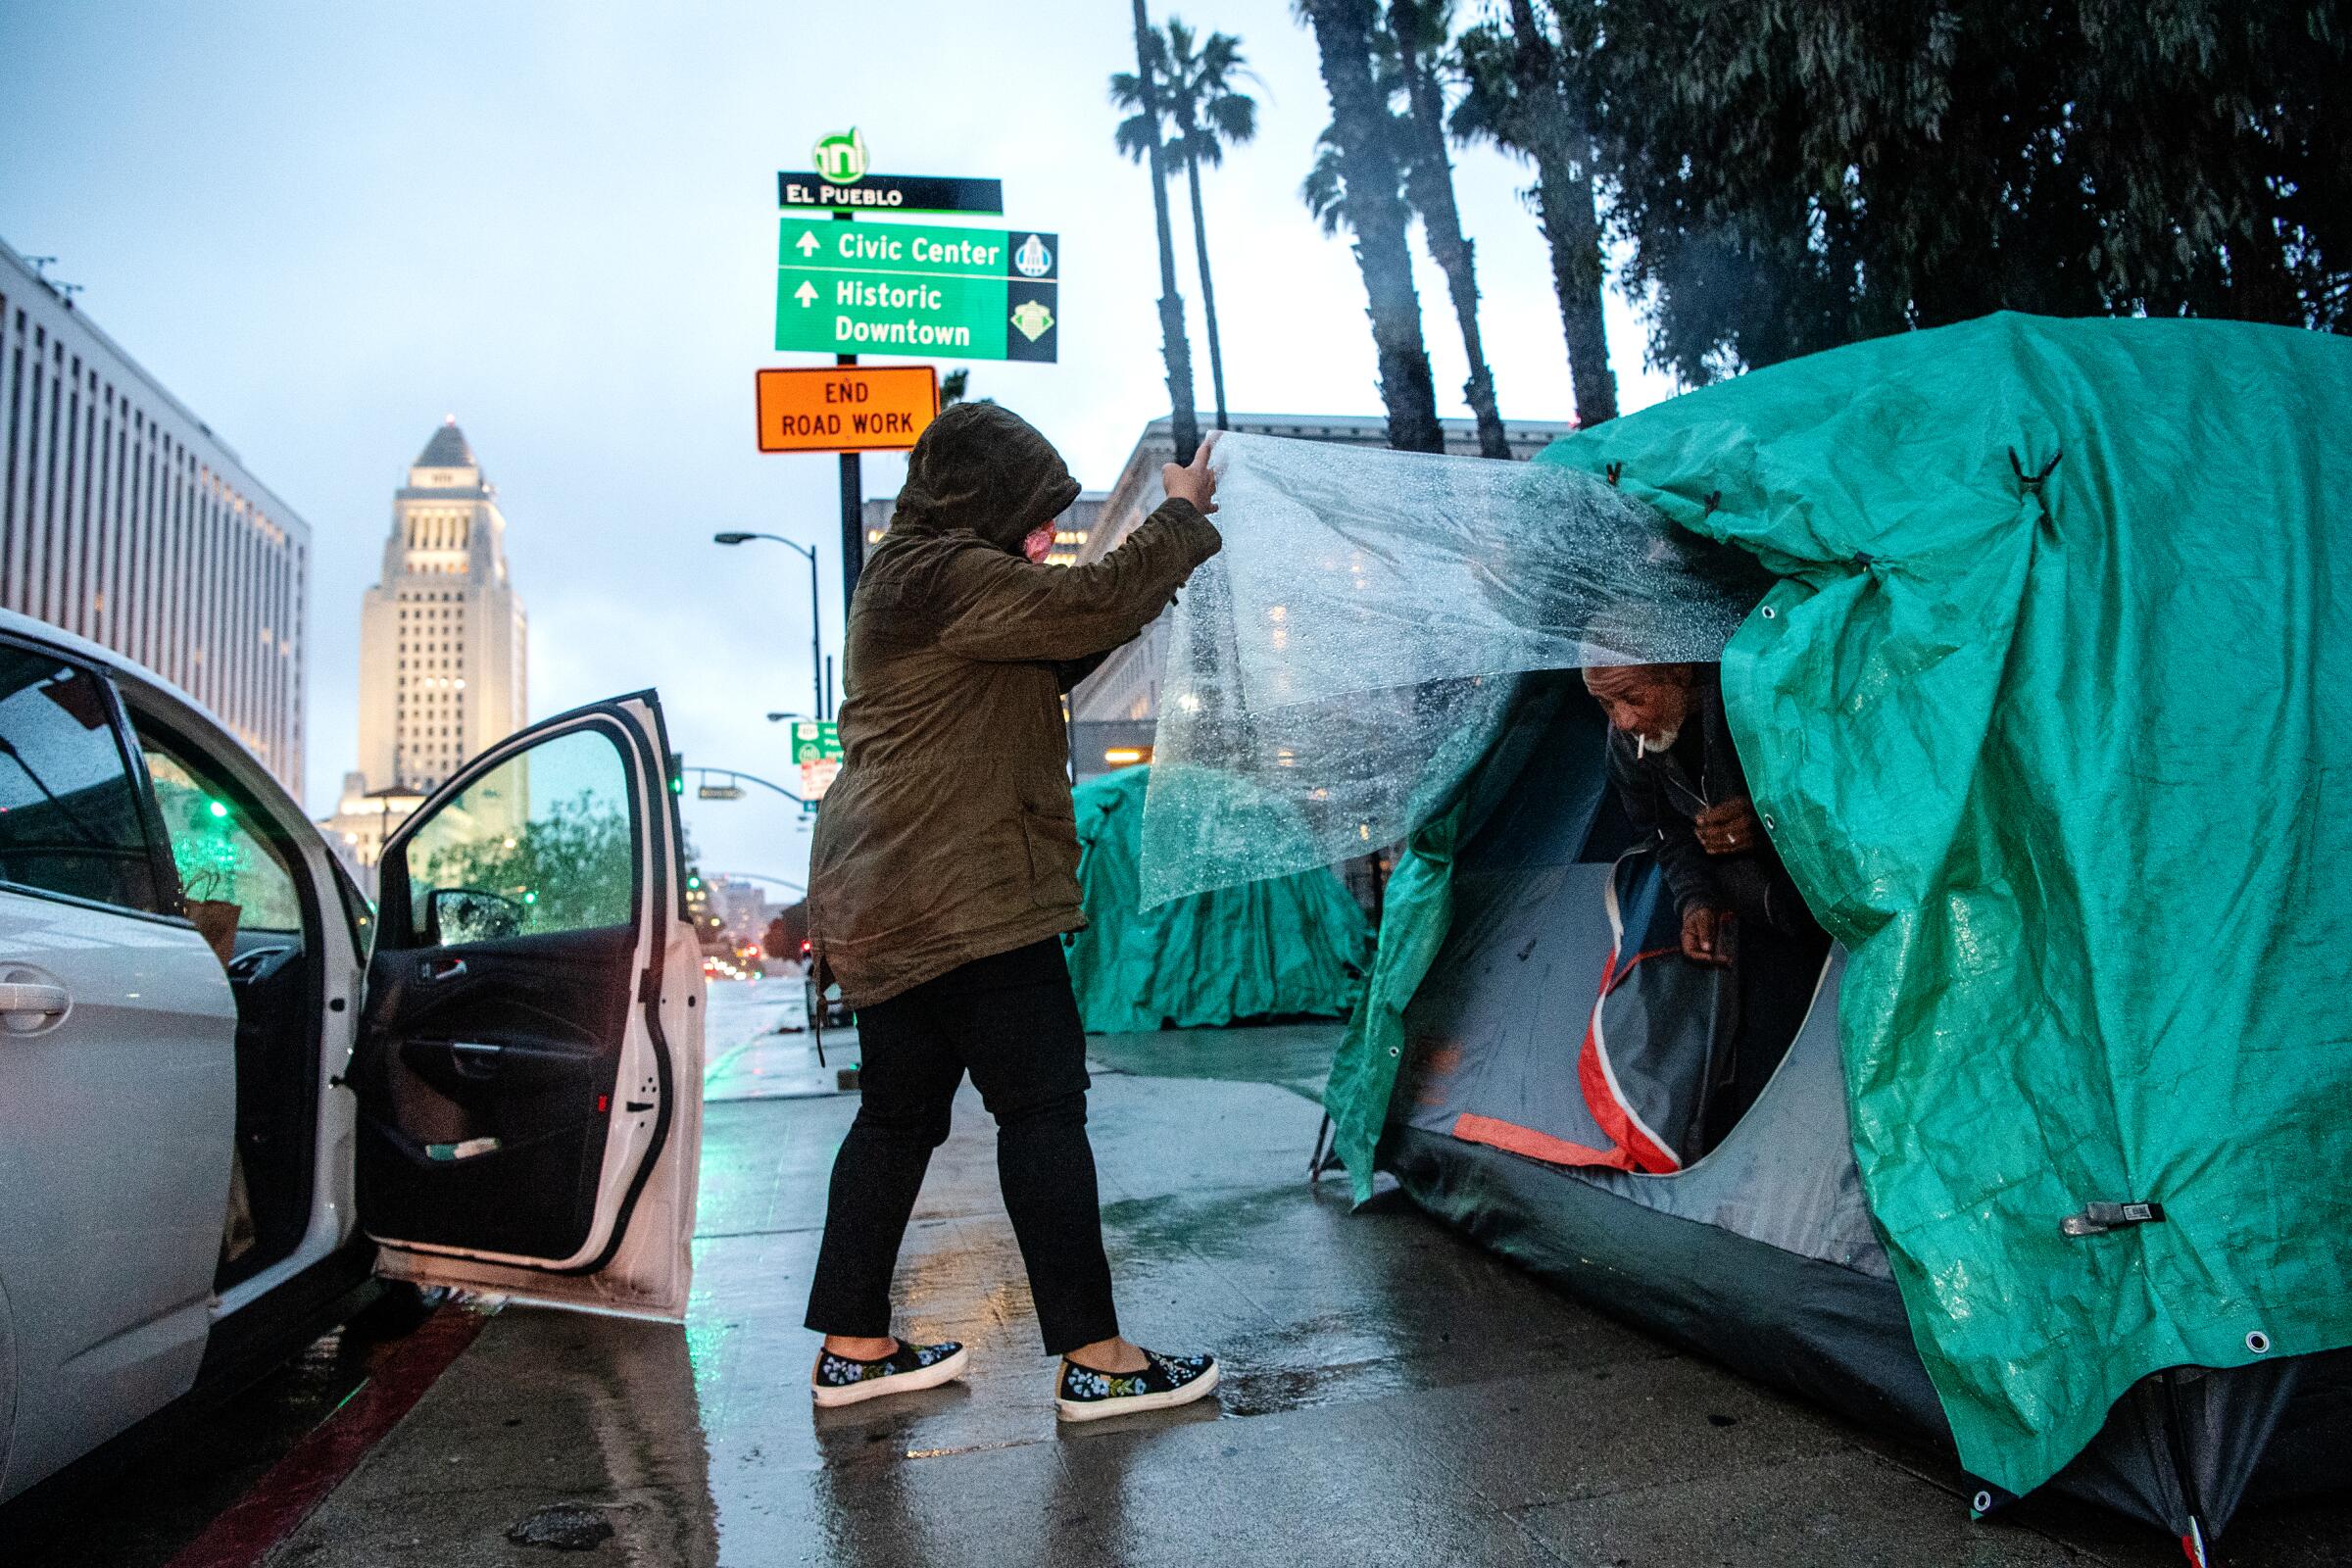 Melissa Acedera distributes meals and supplies to one of her contacts, Harvey, on Olvera Street on a rainy evening in downtown Los Angeles.